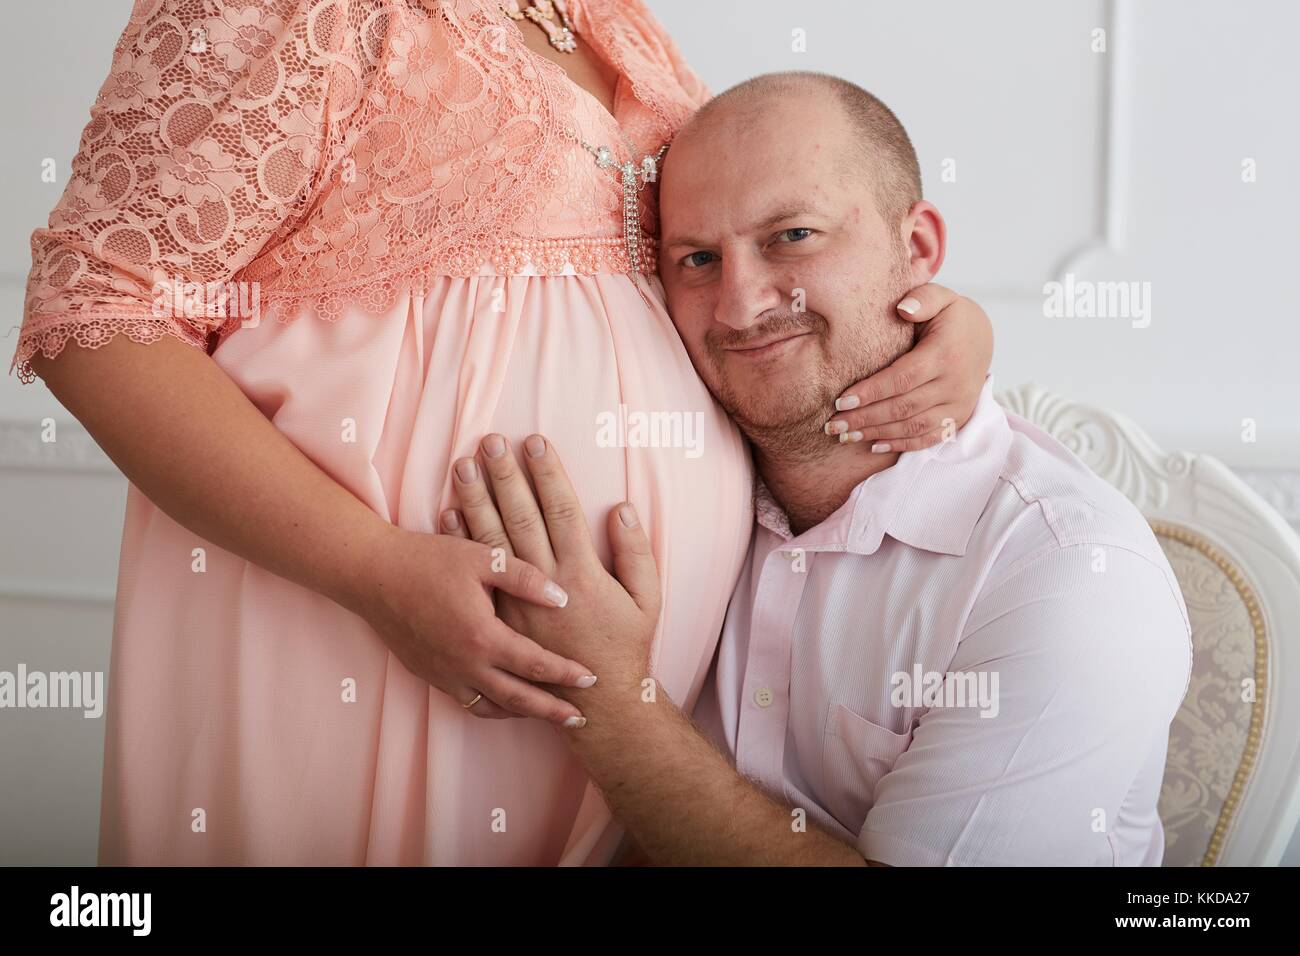 Man embracing belly of pregnant woman in coral dress  on luxury decorated white wall background. Stock Photo